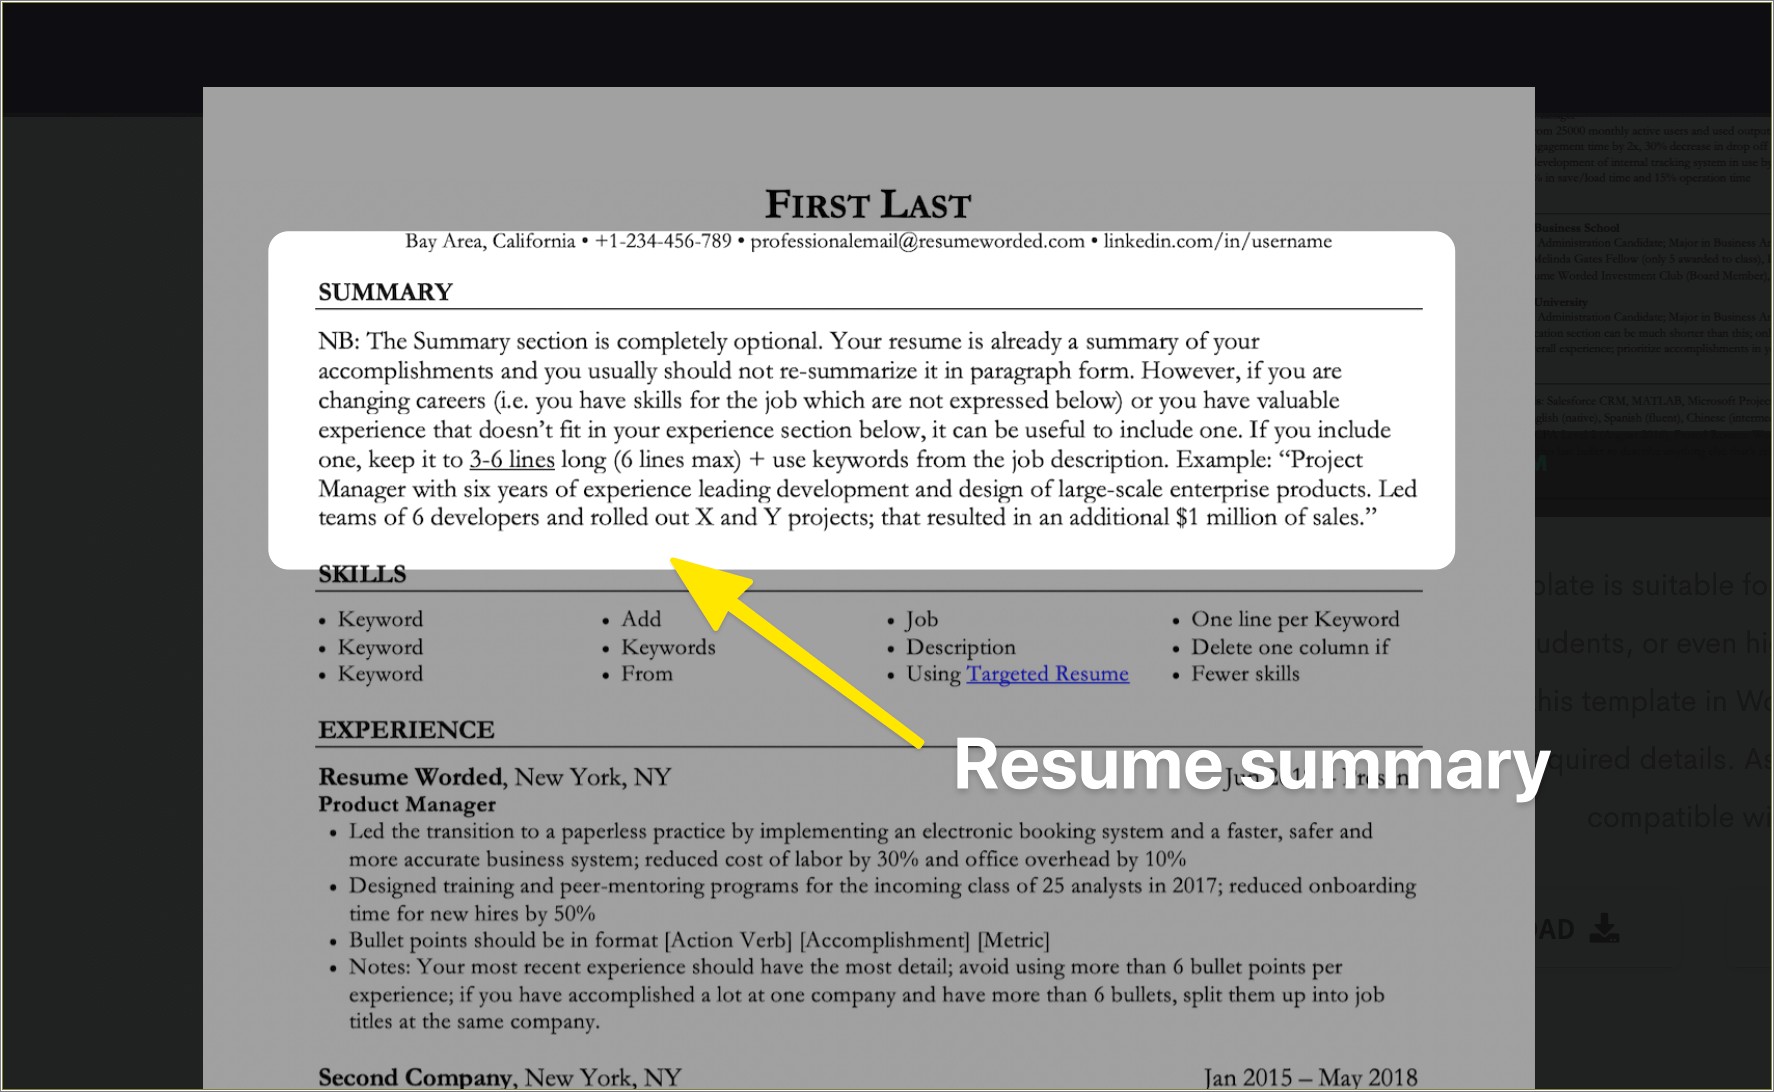 Can You Not Add Descriptions In Resume